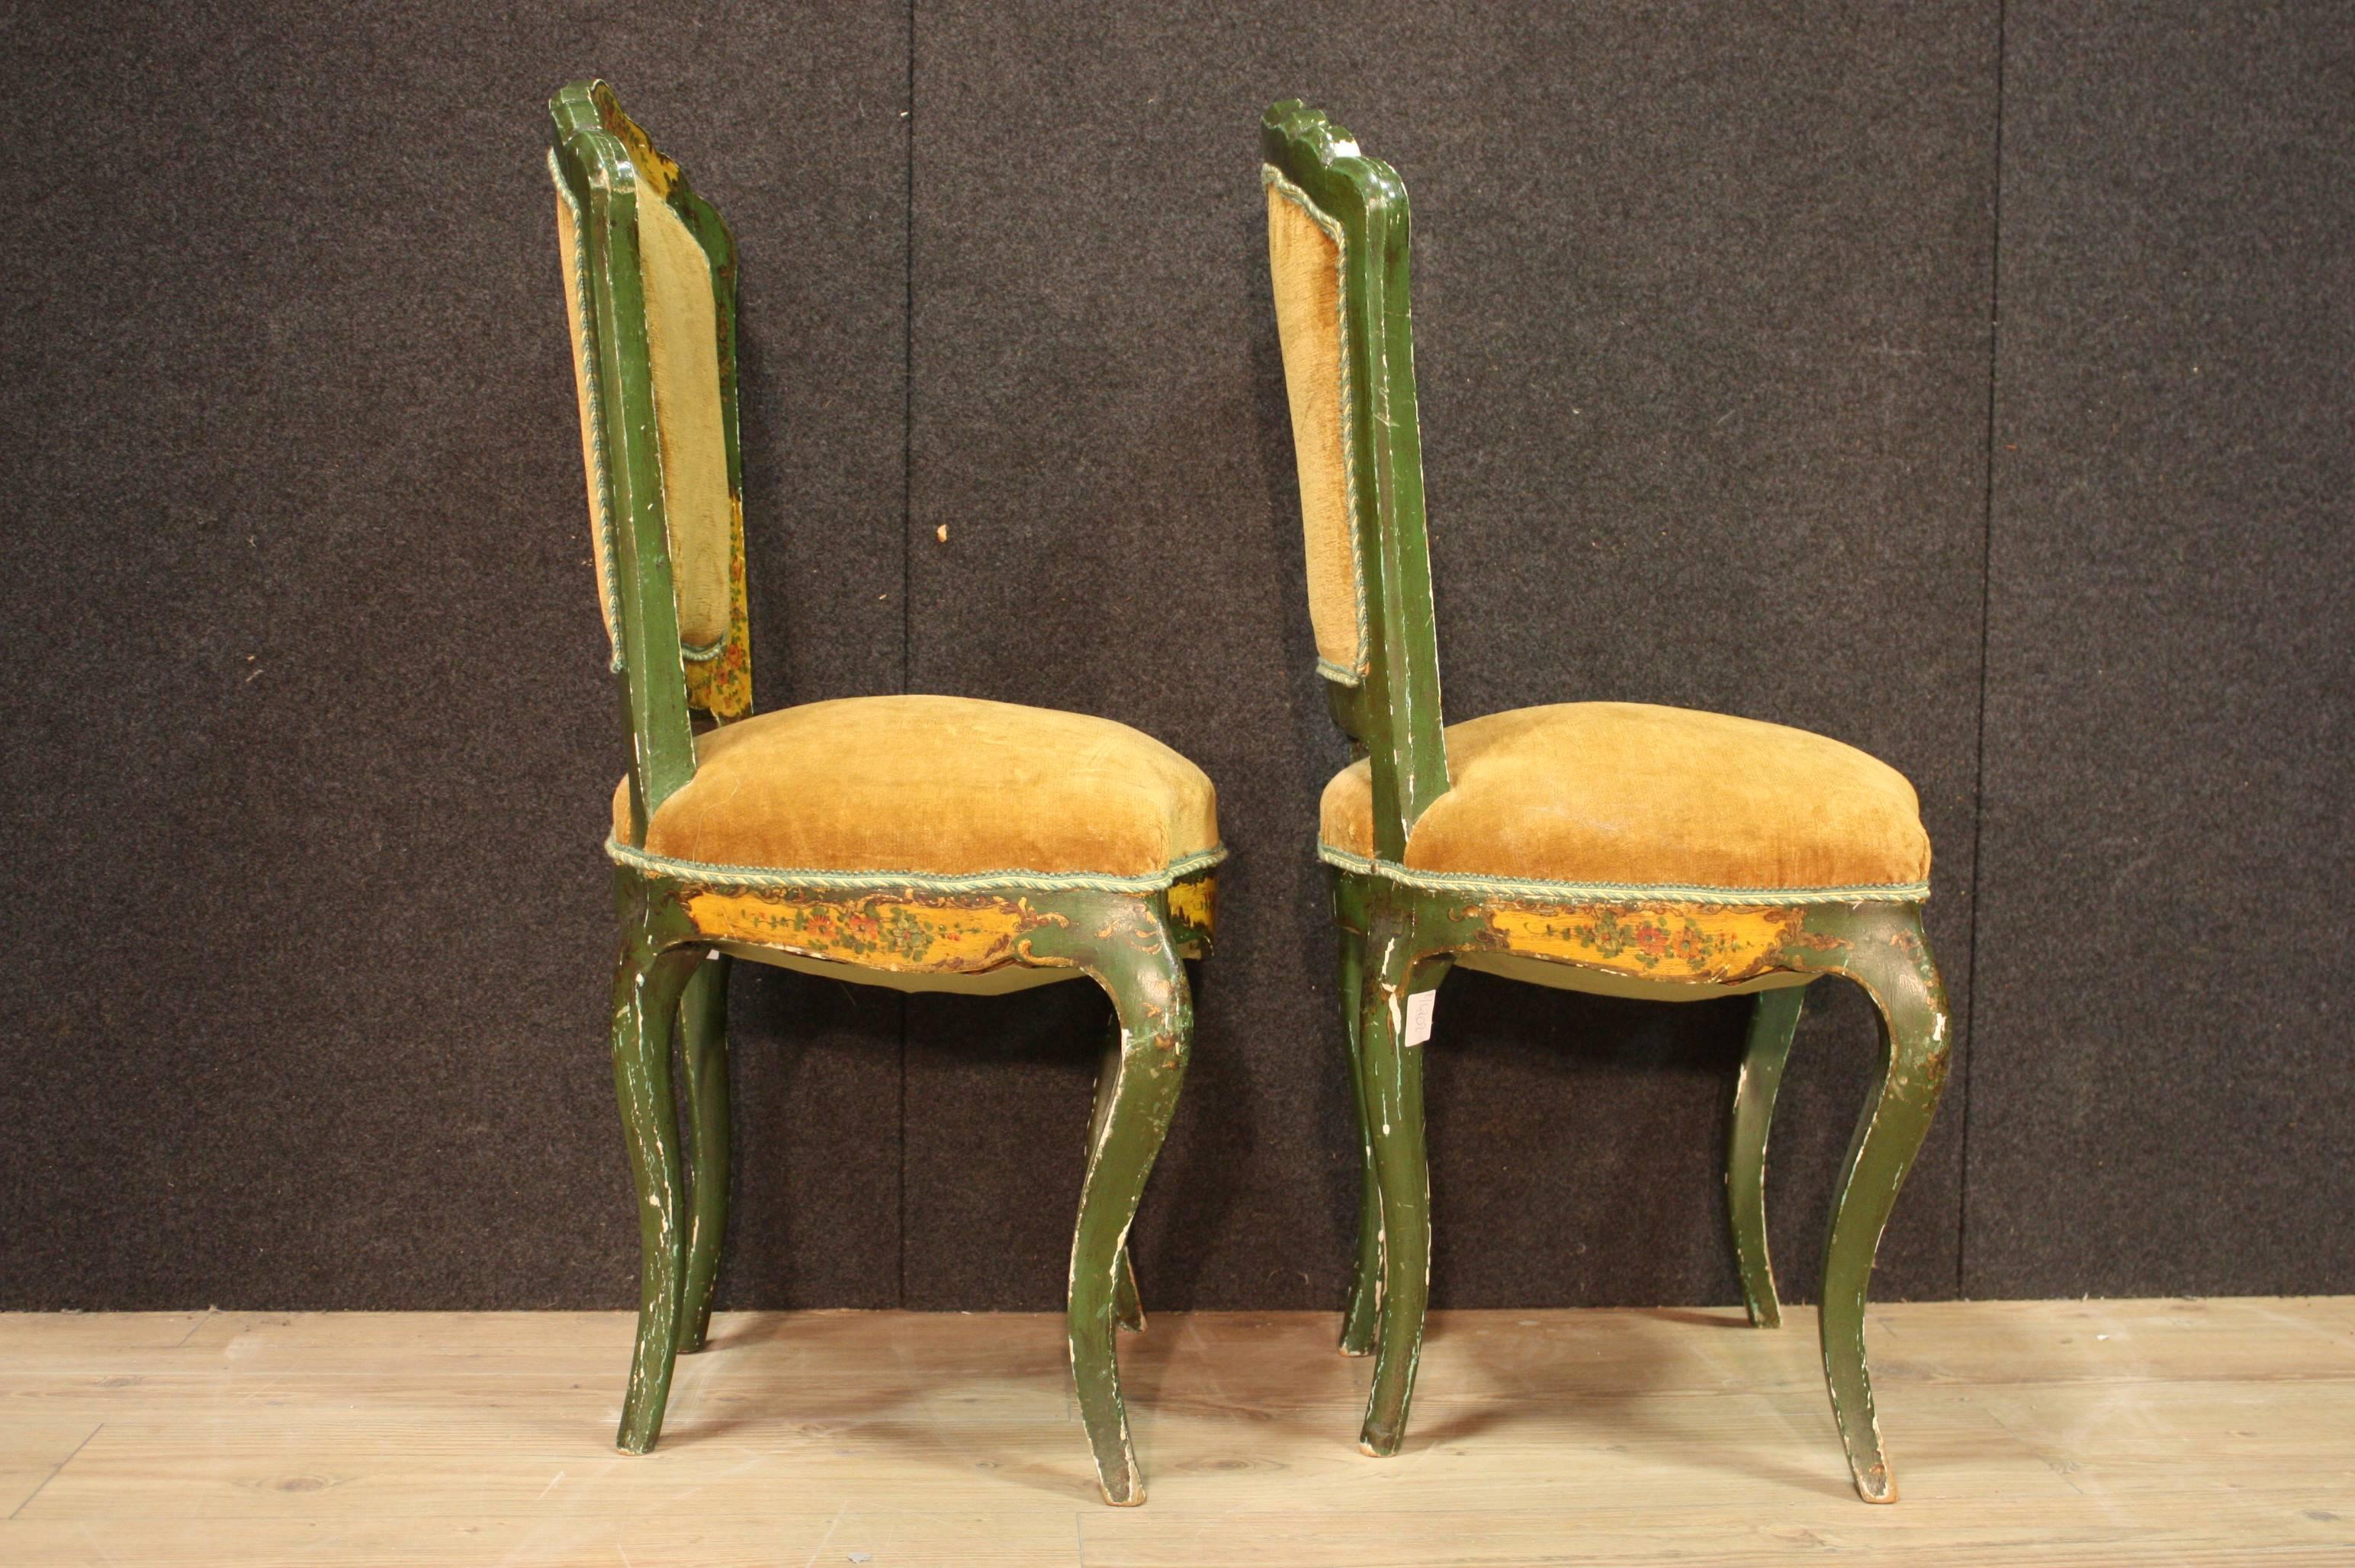 Italian 20th Century Pair of Venetian Lacquered and Gilded Chairs